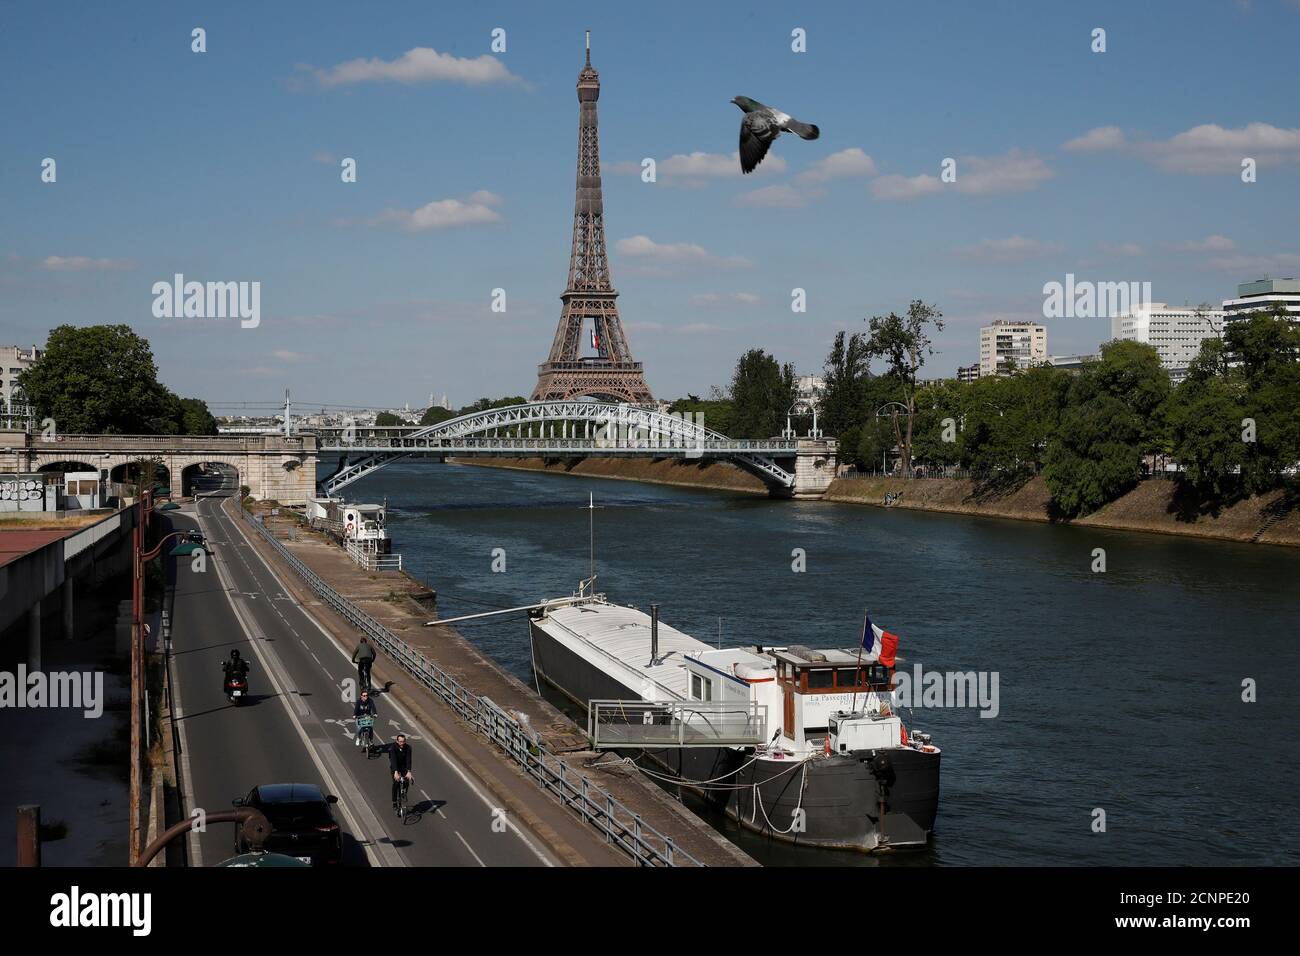 People ride bicycles on a bike path on the banks of the river Seine with the Pont Rouelle bridge and the Eiffel tower in the background in Paris during the outbreak coronavirus disease (COVID-19) in France, May 14, 2020. REUTERS/Gonzalo Fuentes Stock Photo